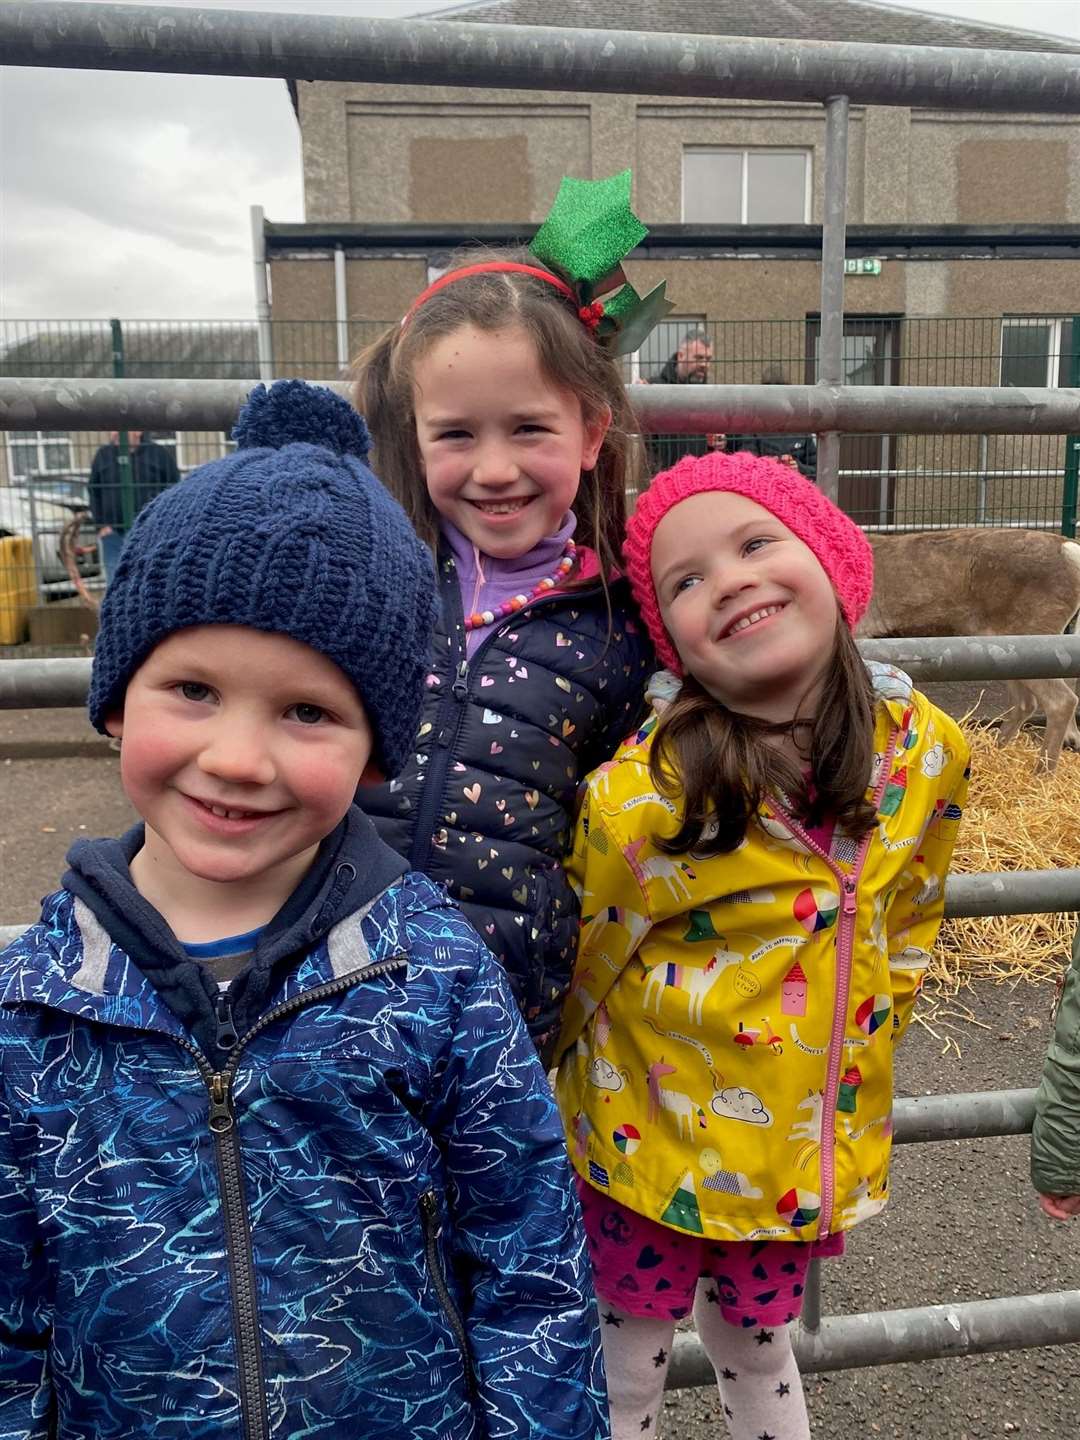 Philip, Annie and Elsie Galbraith travelled to the Winterfest from Perth